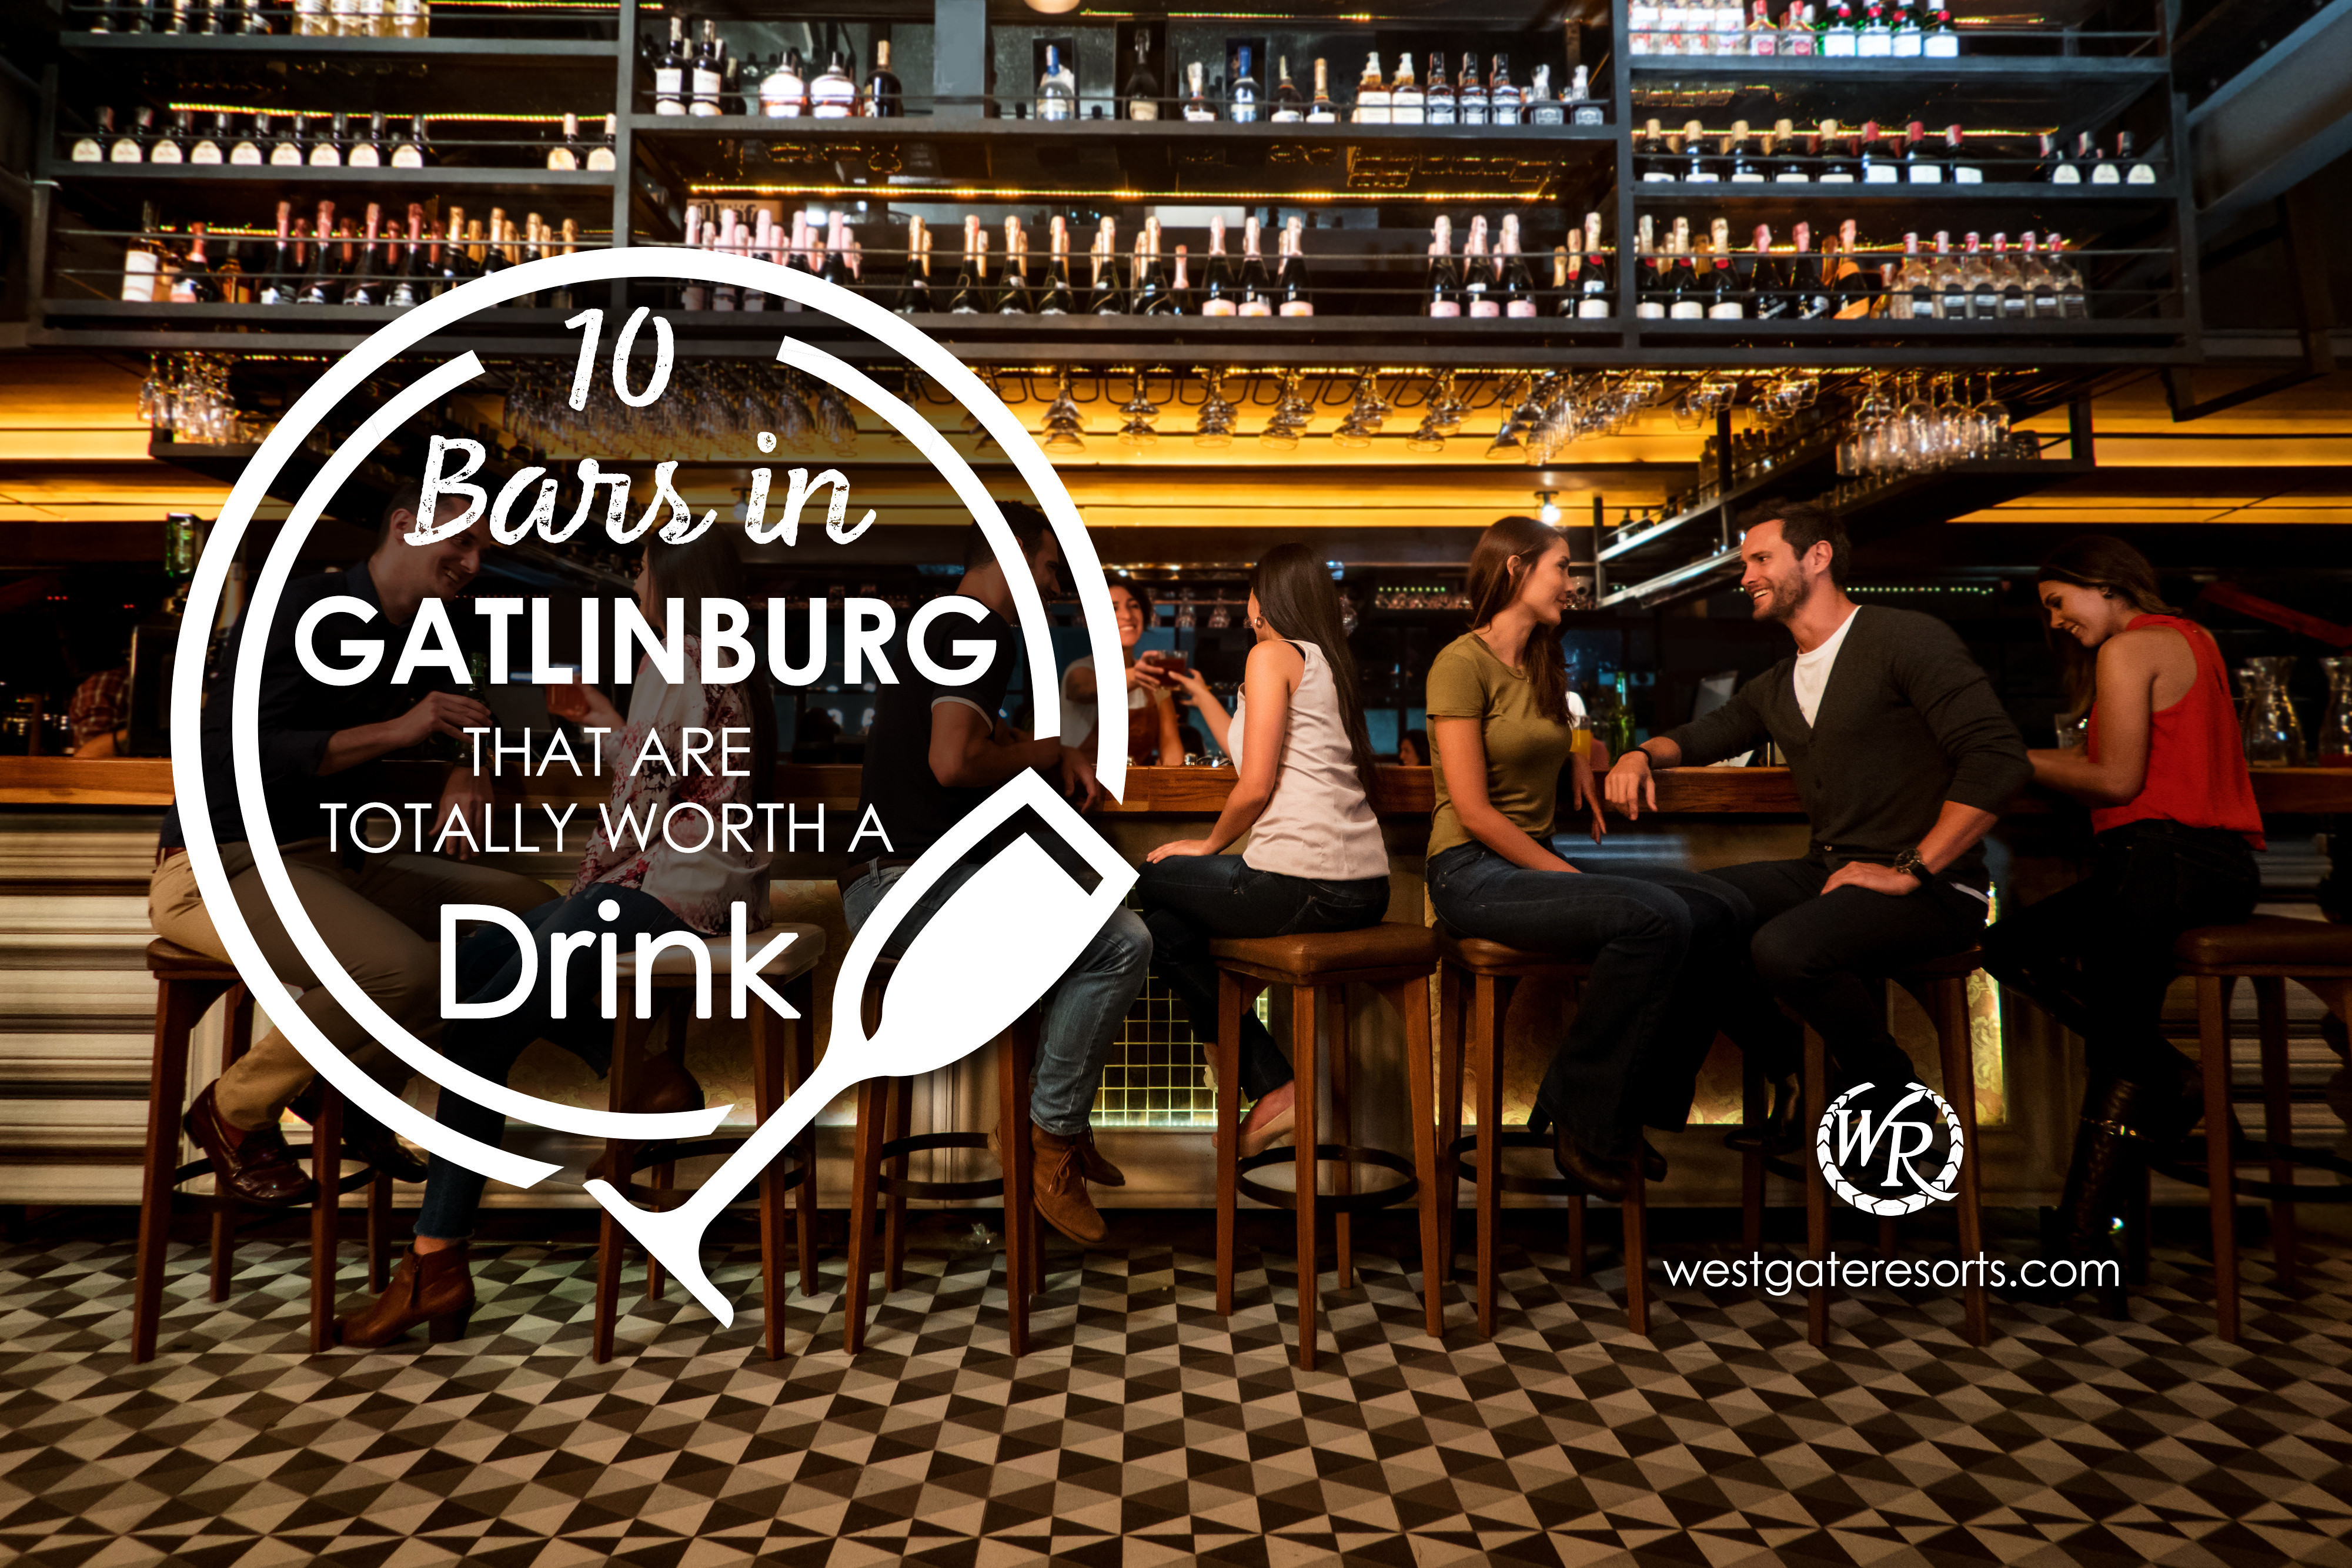 10 Bars in Gatlinburg That Are Worth a Drink